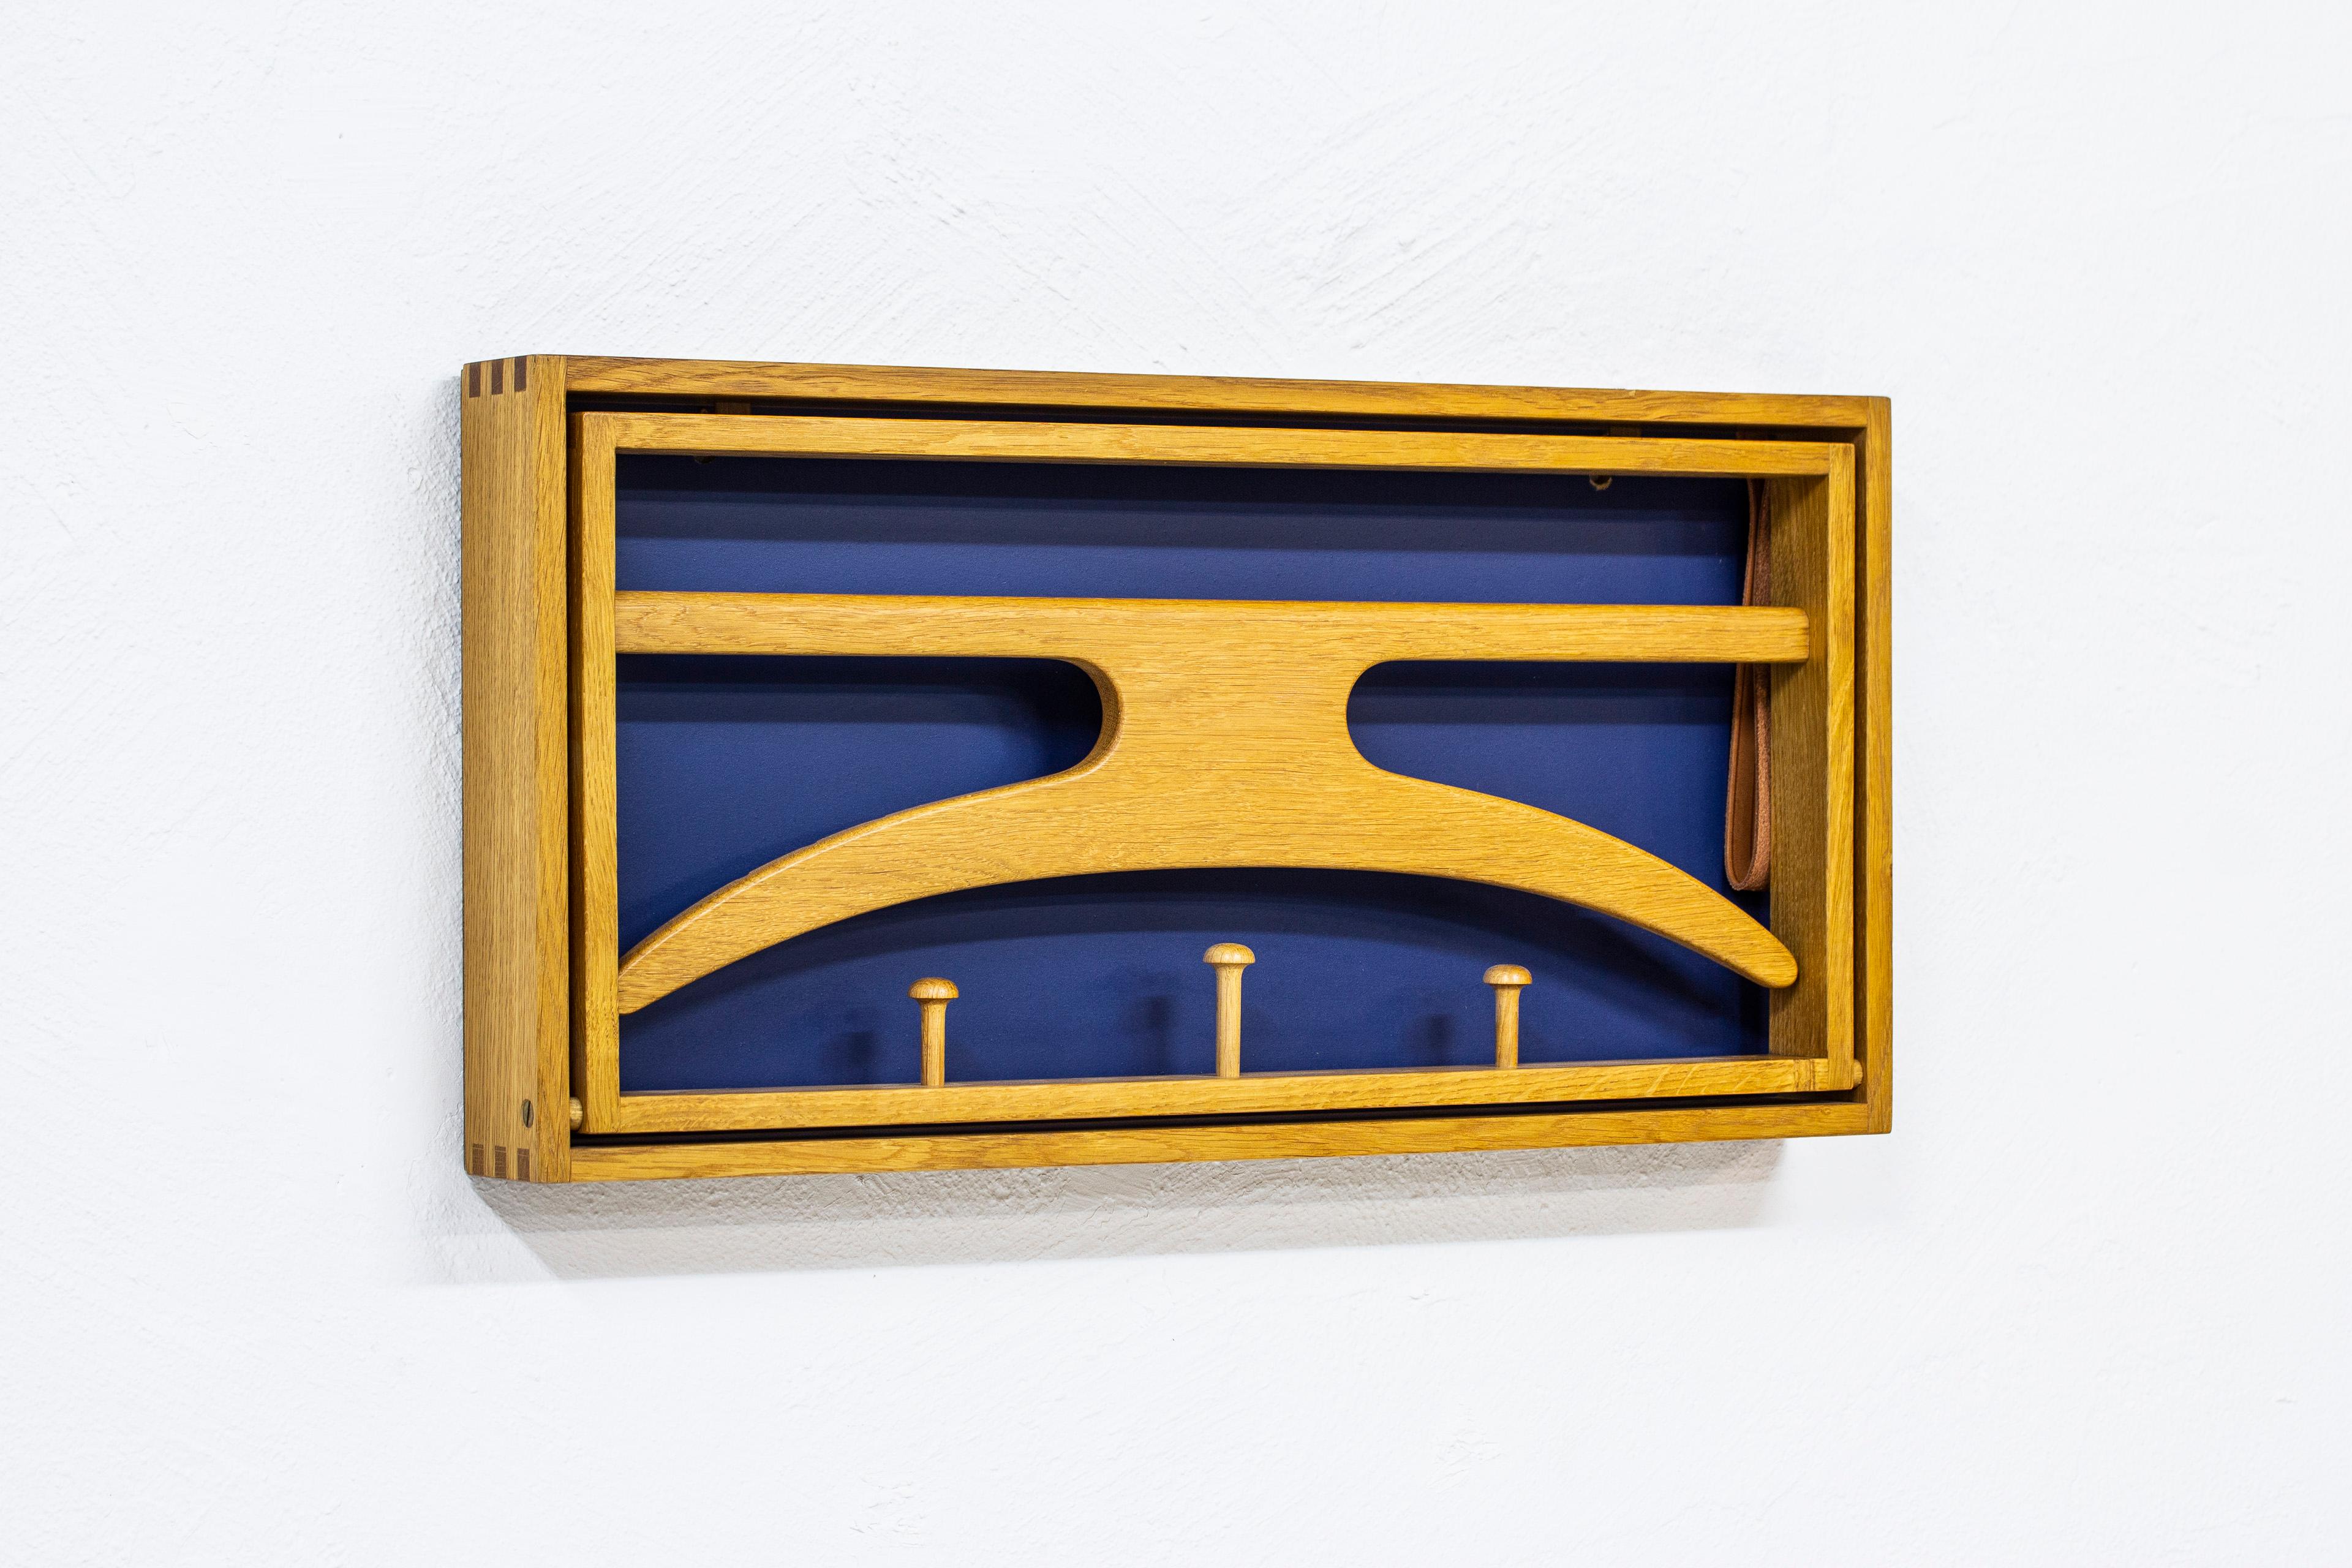 Wall-mounted valet designed by Adam Hoff & Poul Østergaard. Produced in Denmark during the late 1950s by Virum Møbelsnedkeri. Solid oak frame with visible joinery, leather straps and blue lacquered back part. Very good condition with light wear and